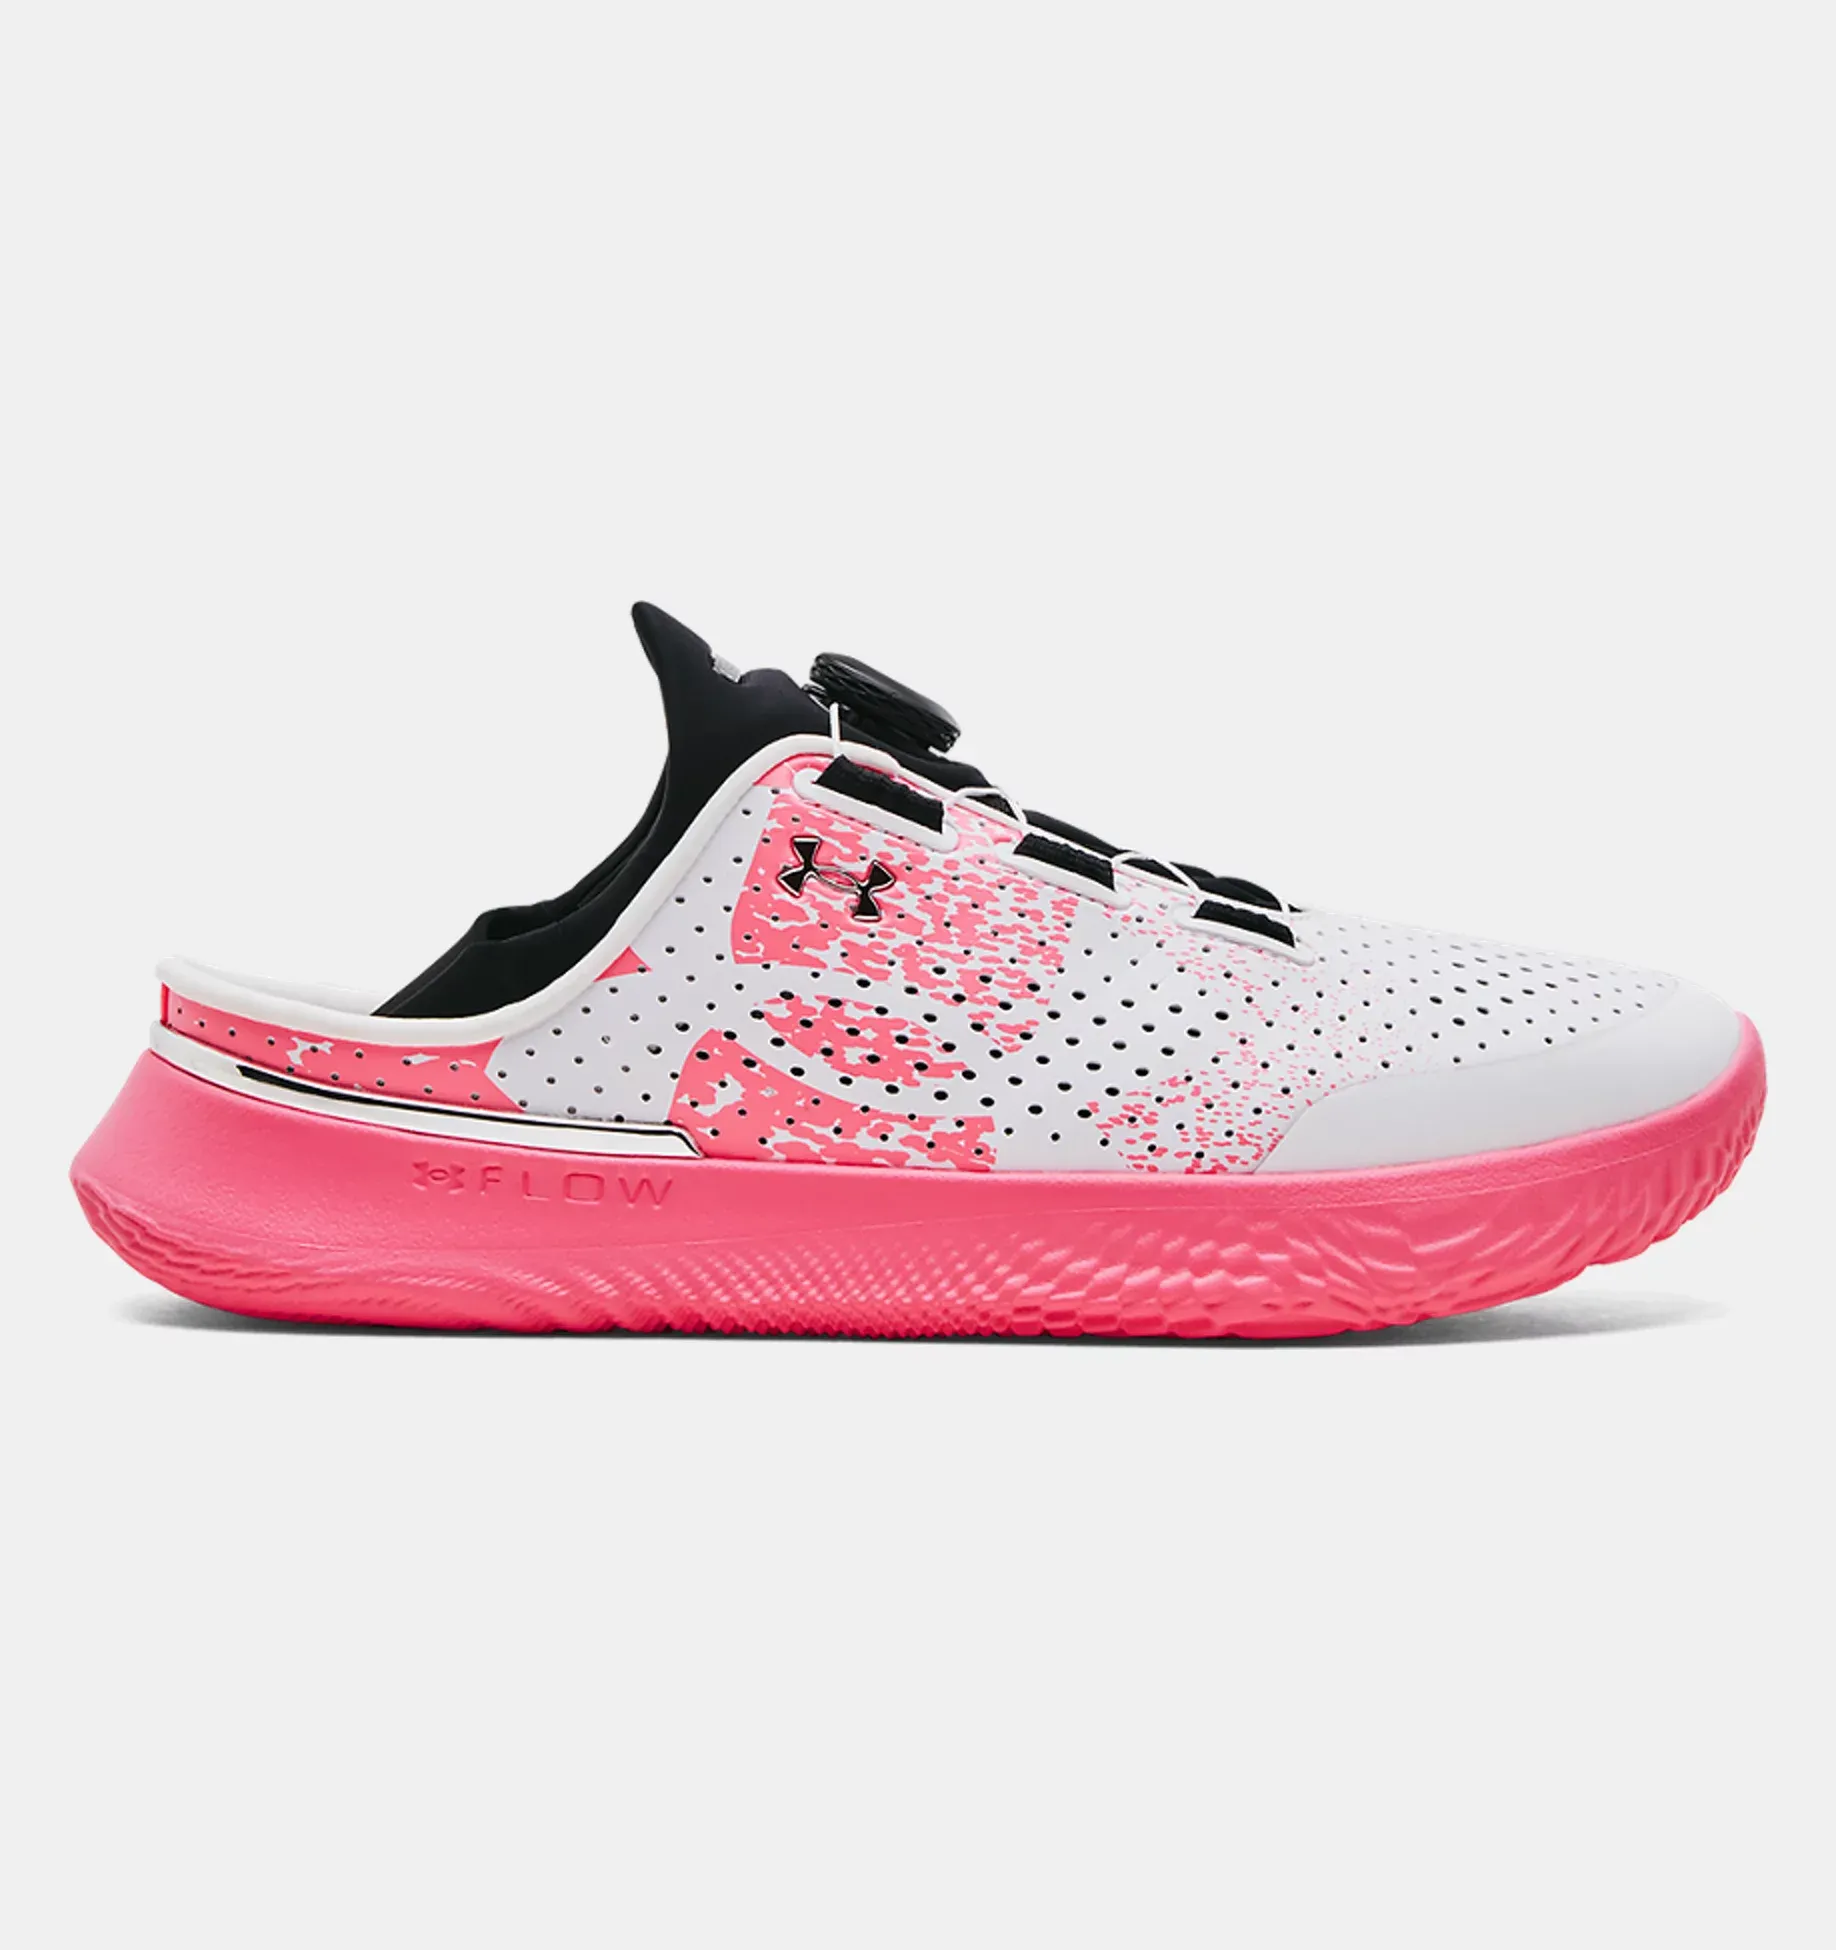 Under Armour's transformative SlipSpeed™ sneaker for enhanced training